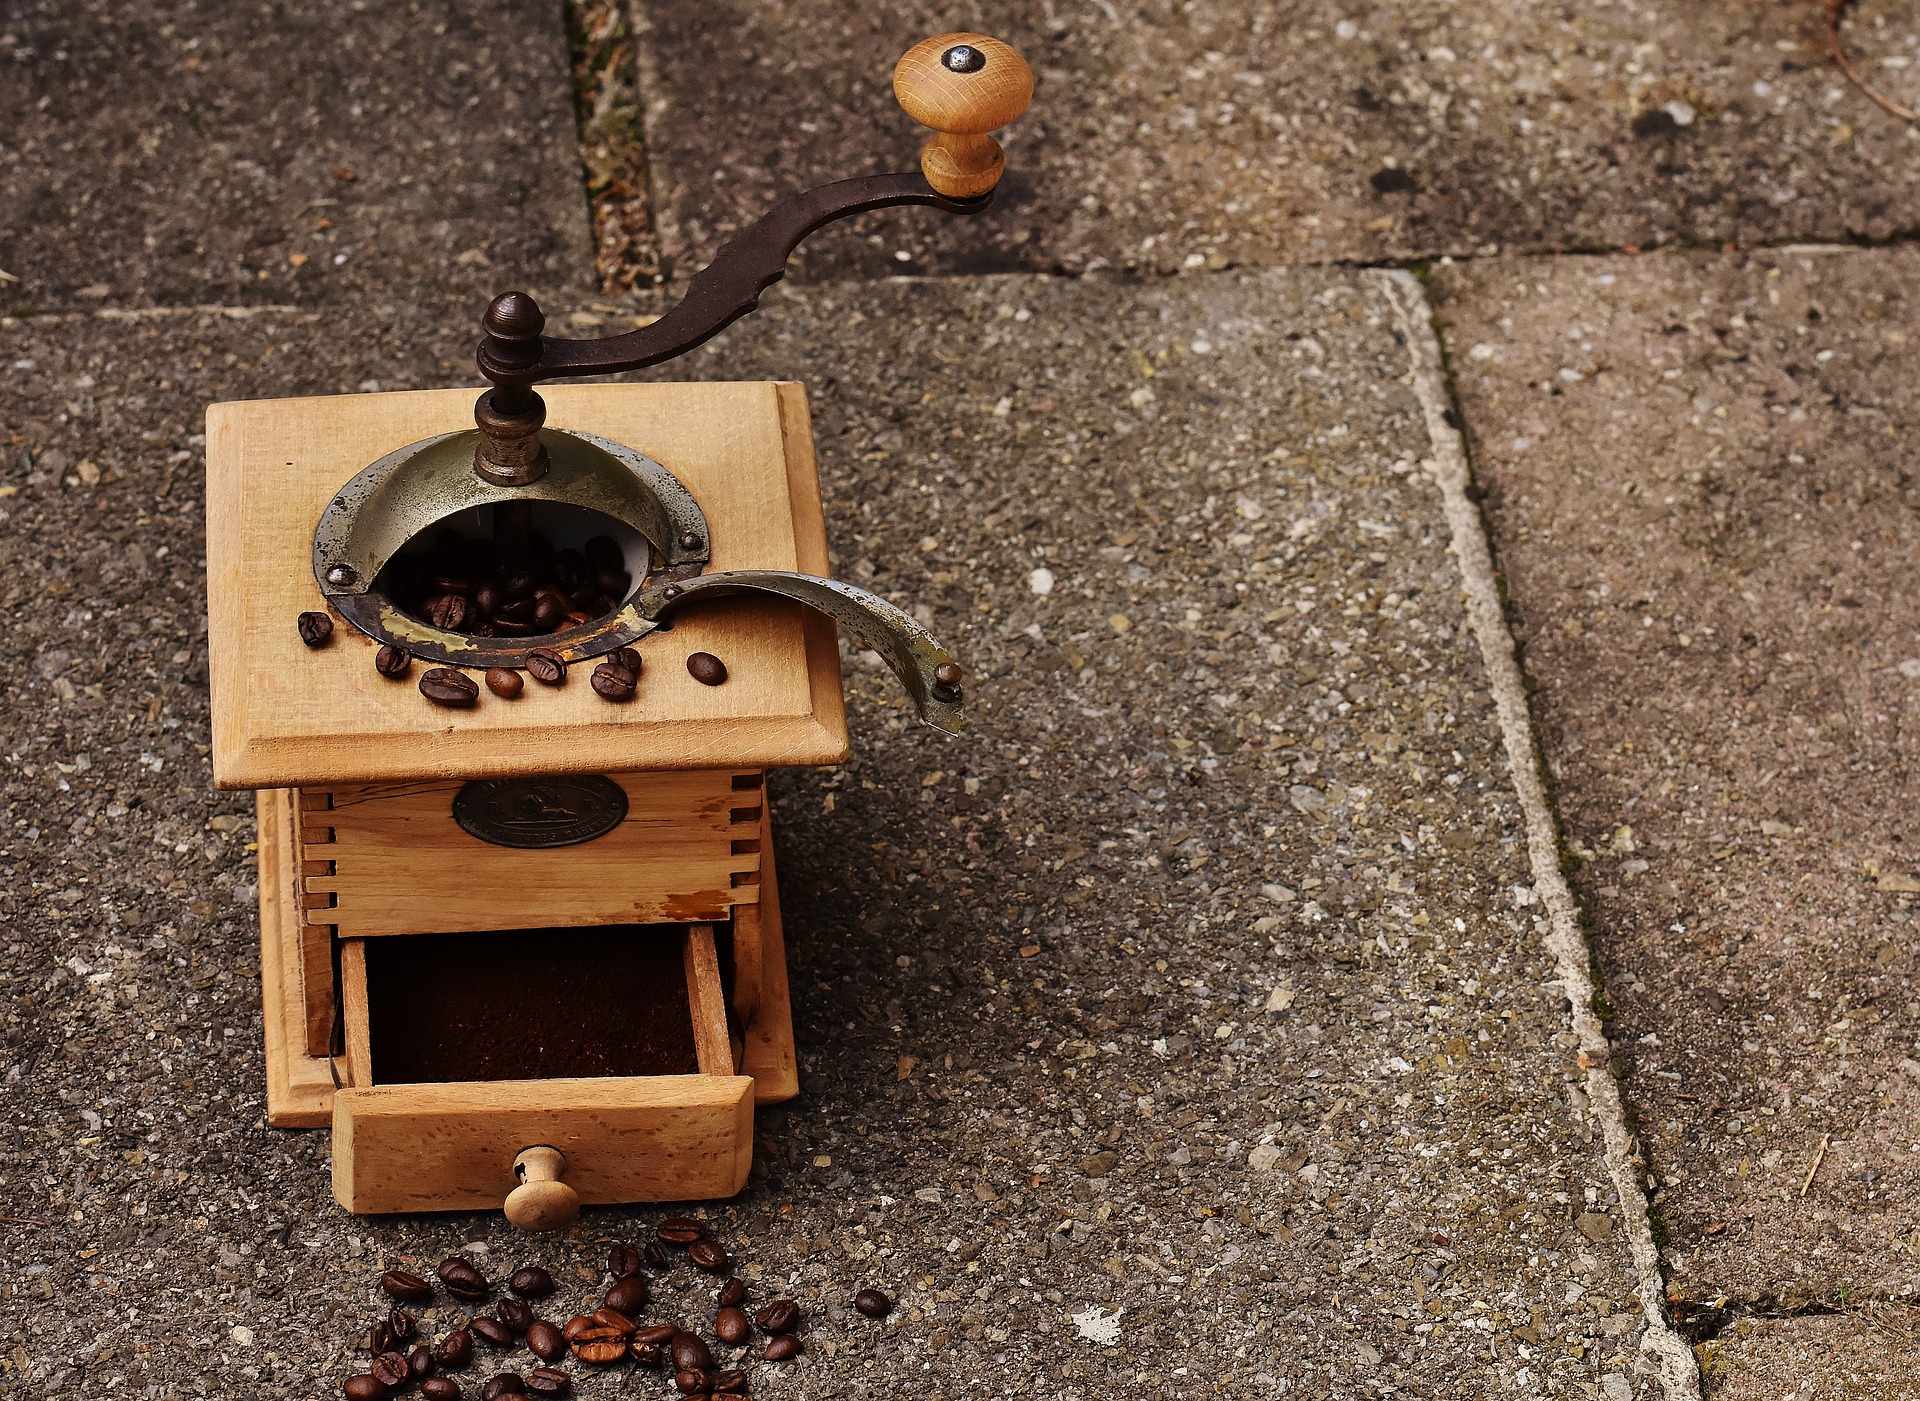 Finding the Best Coffee Grinder For Your Needs